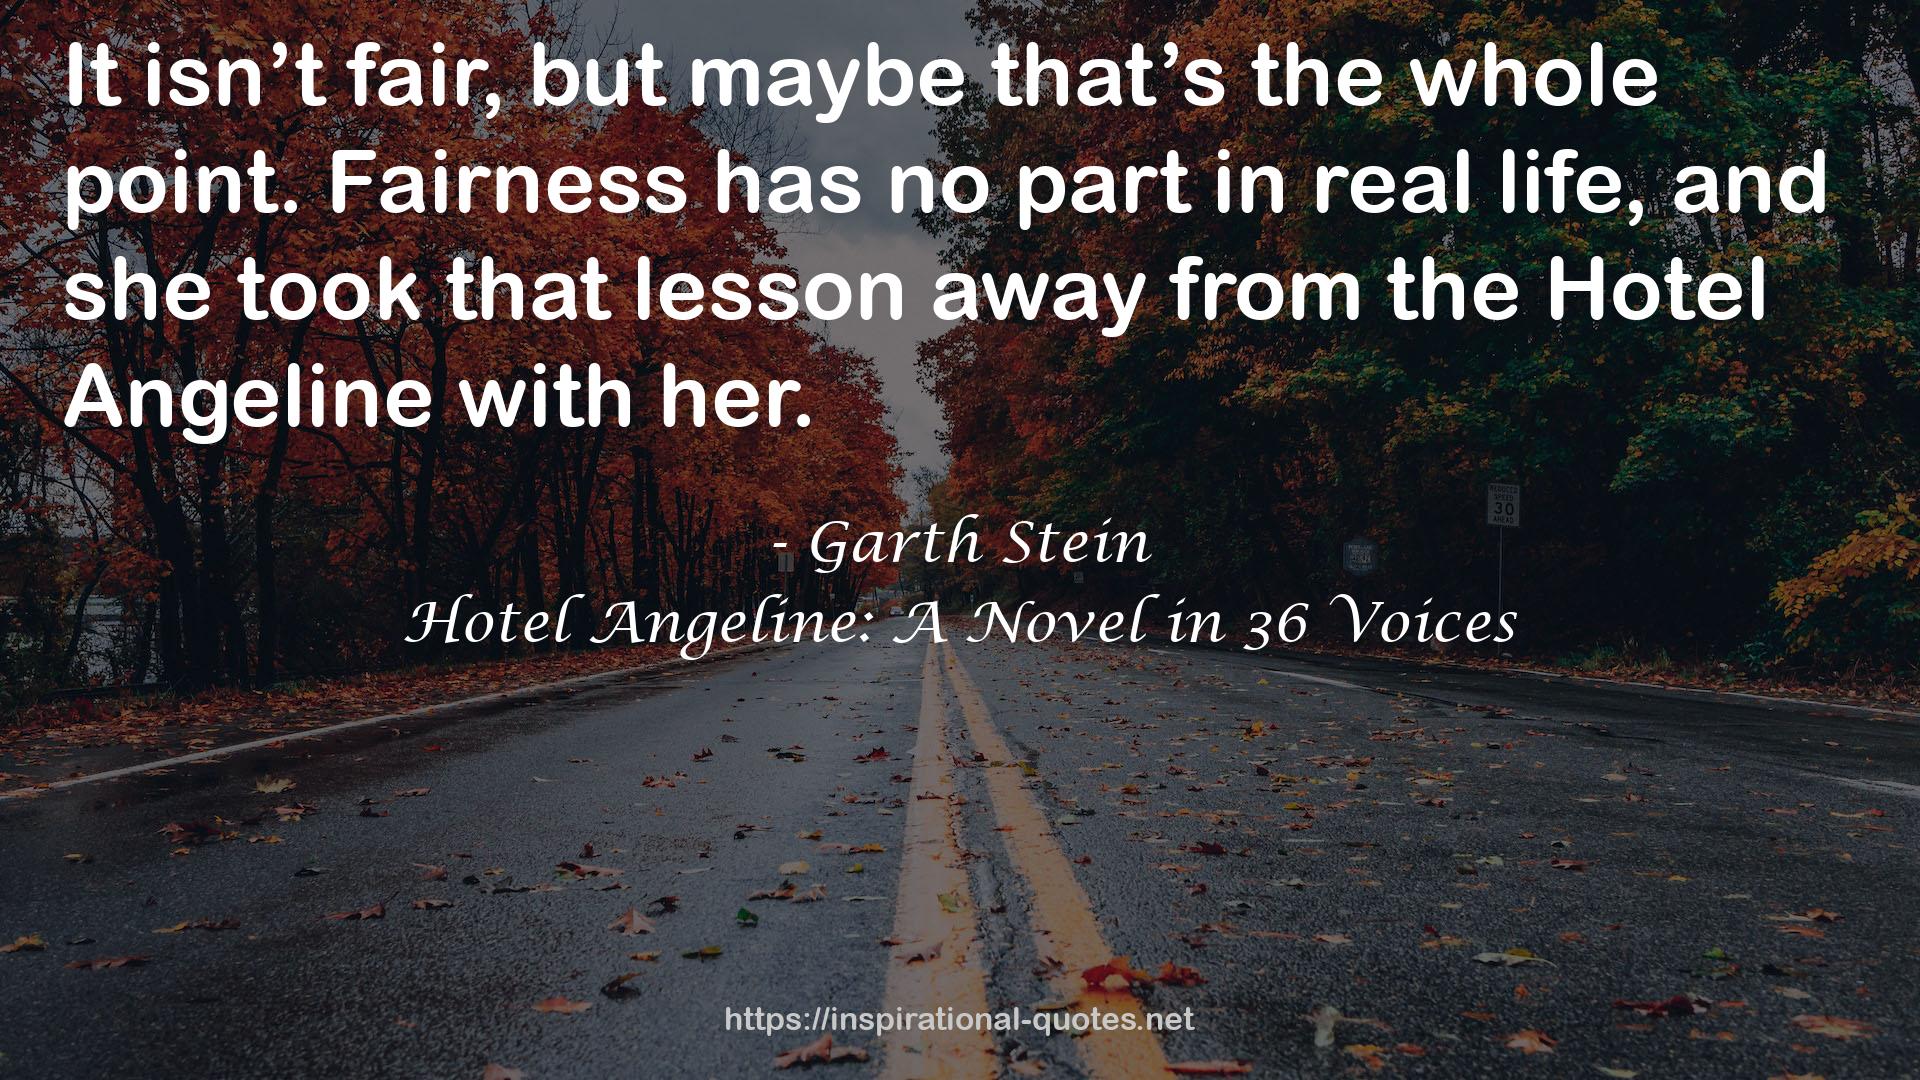 Hotel Angeline: A Novel in 36 Voices QUOTES